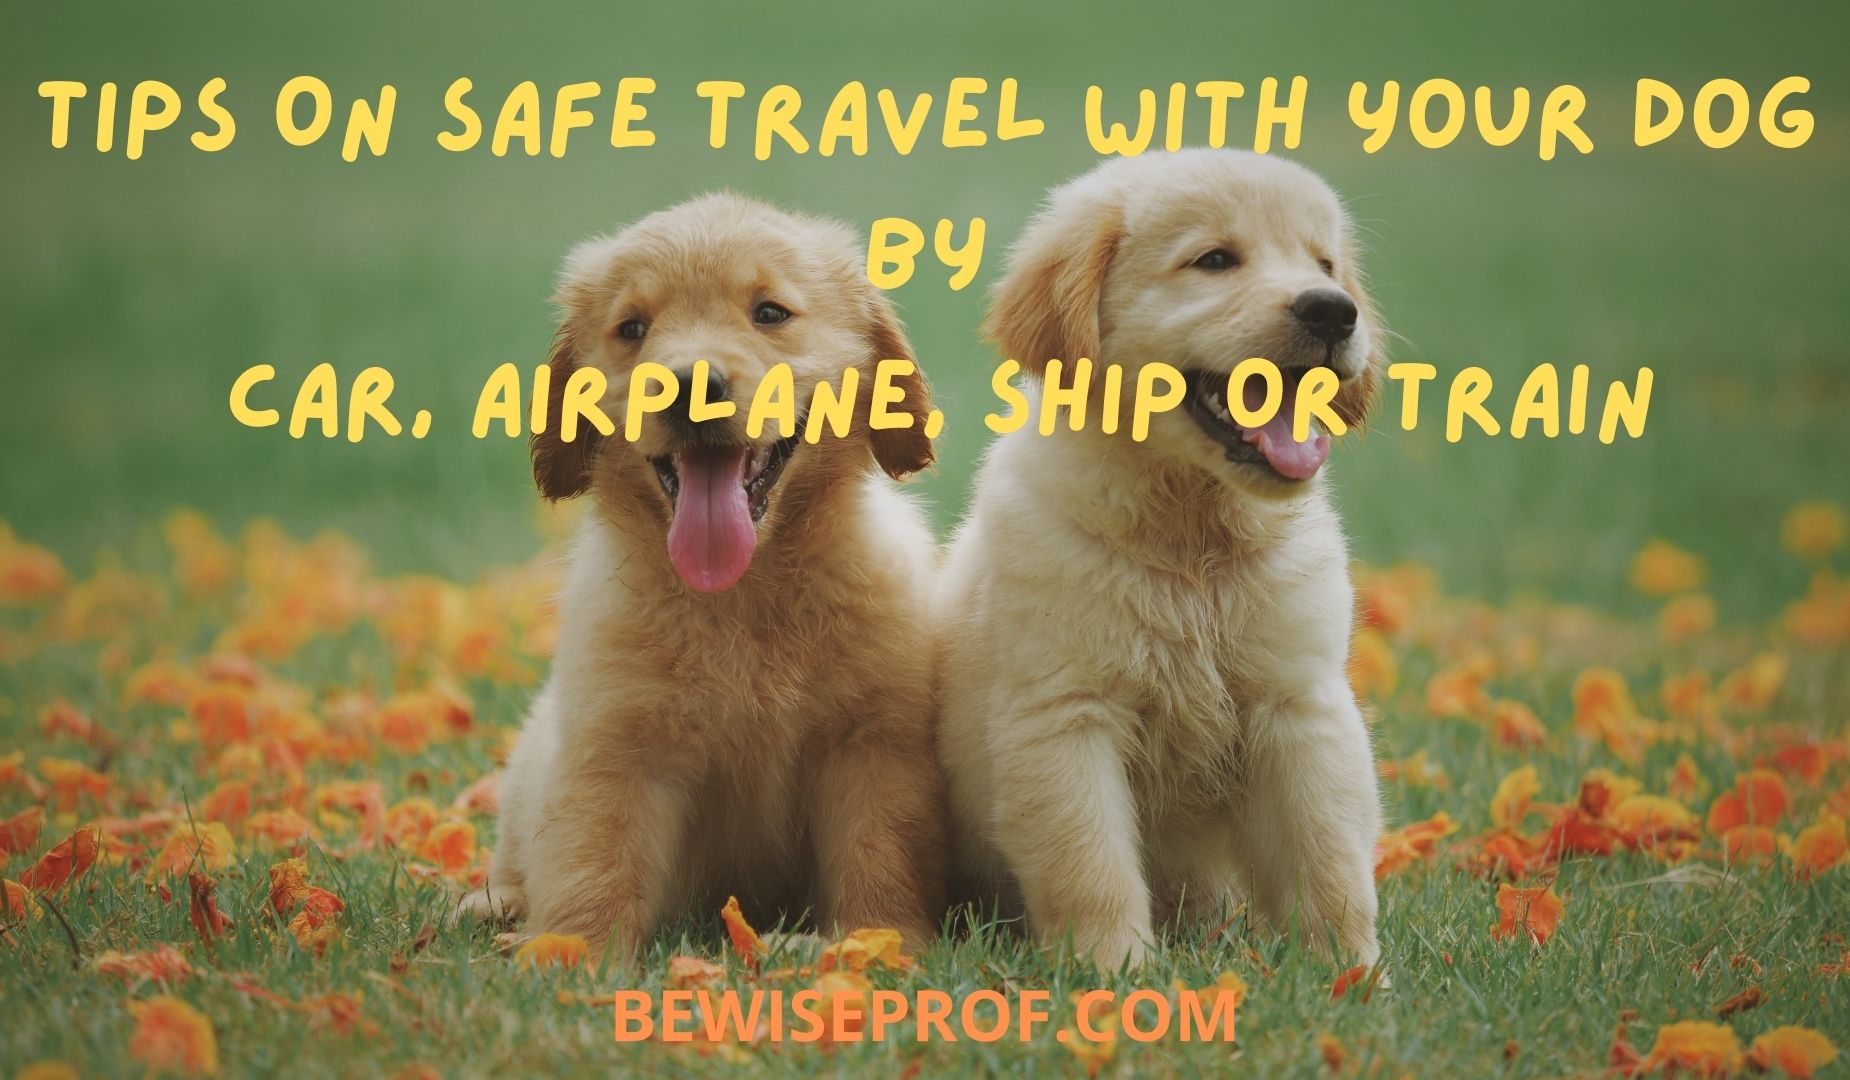 Tips On Safe Travel With Your Dog By Car, Airplane, Ship Or Train